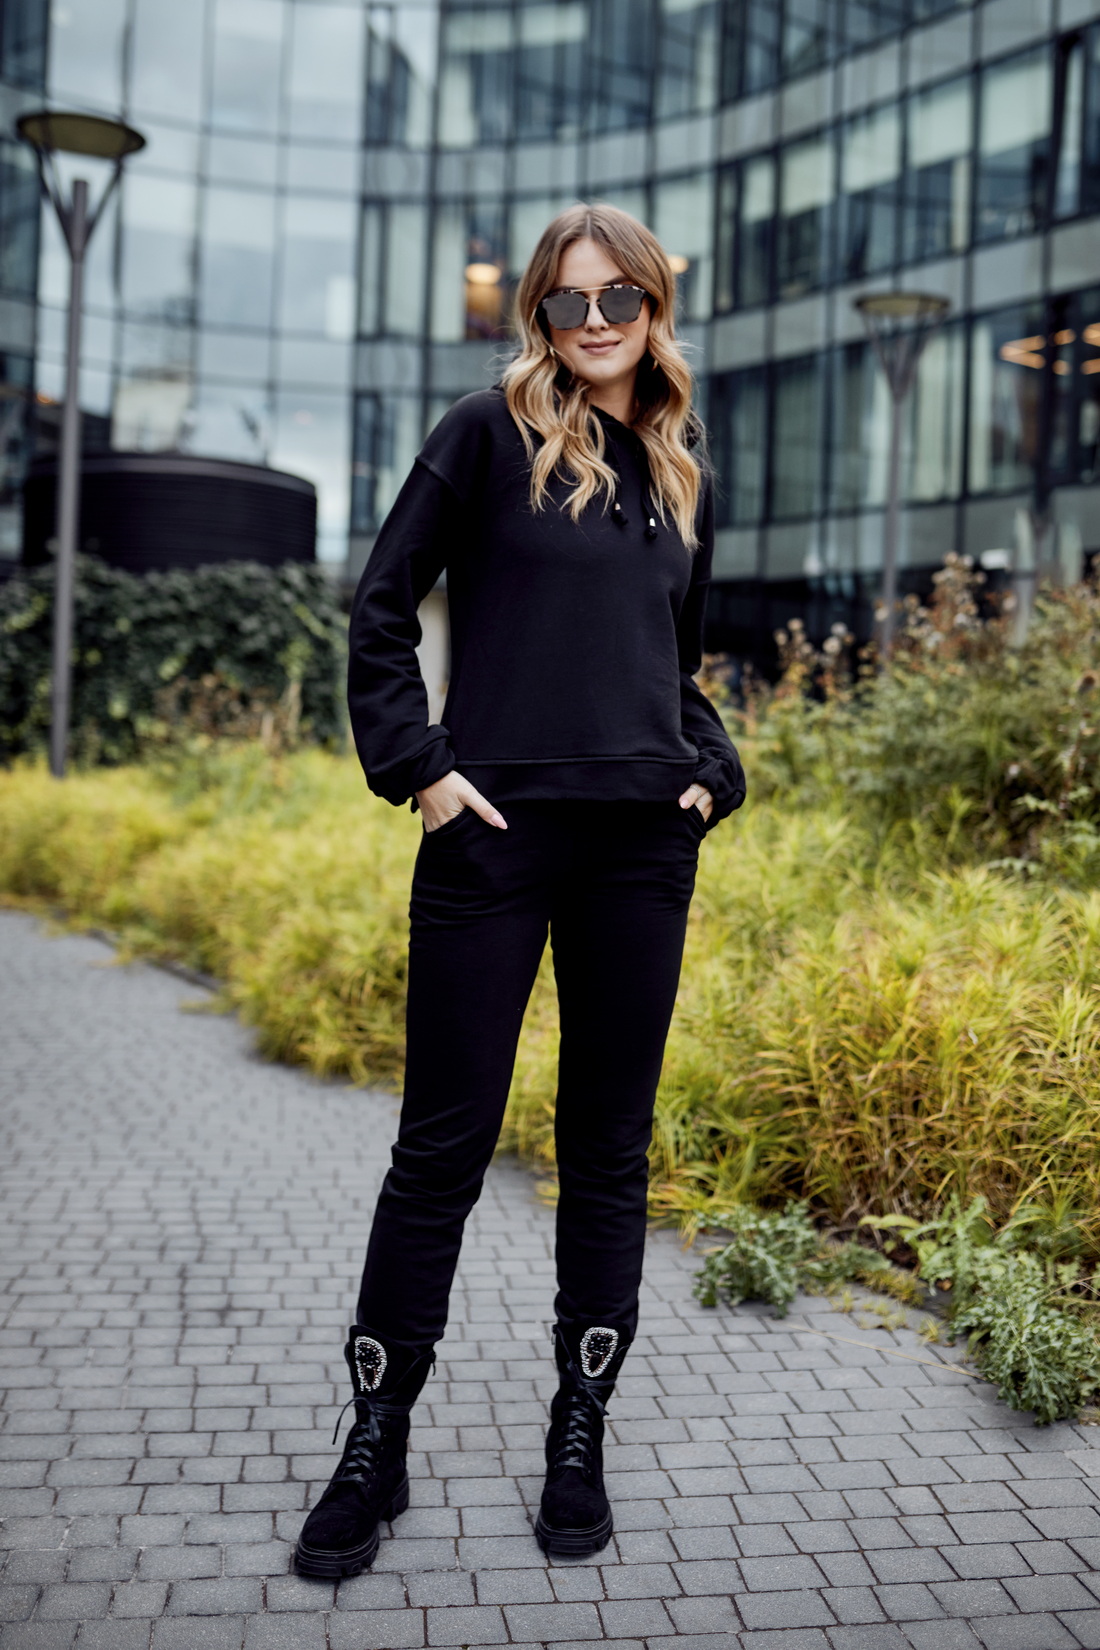 Women's tracksuit made of black cotton